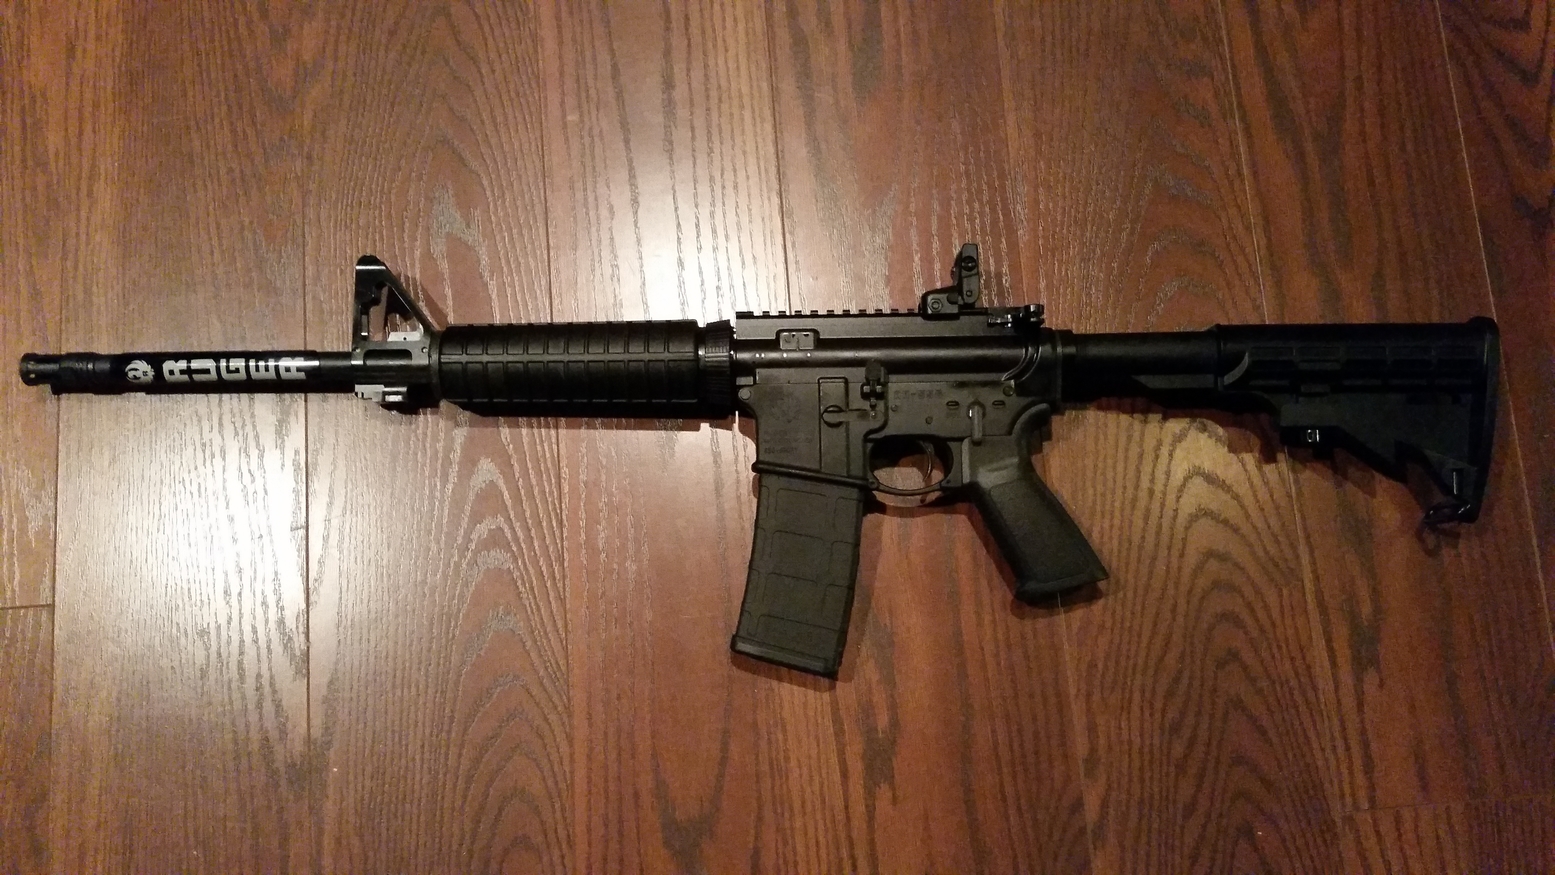 Ar 556 Rifle A Strange Mix Of An Ar 15 And A Normal Gun The